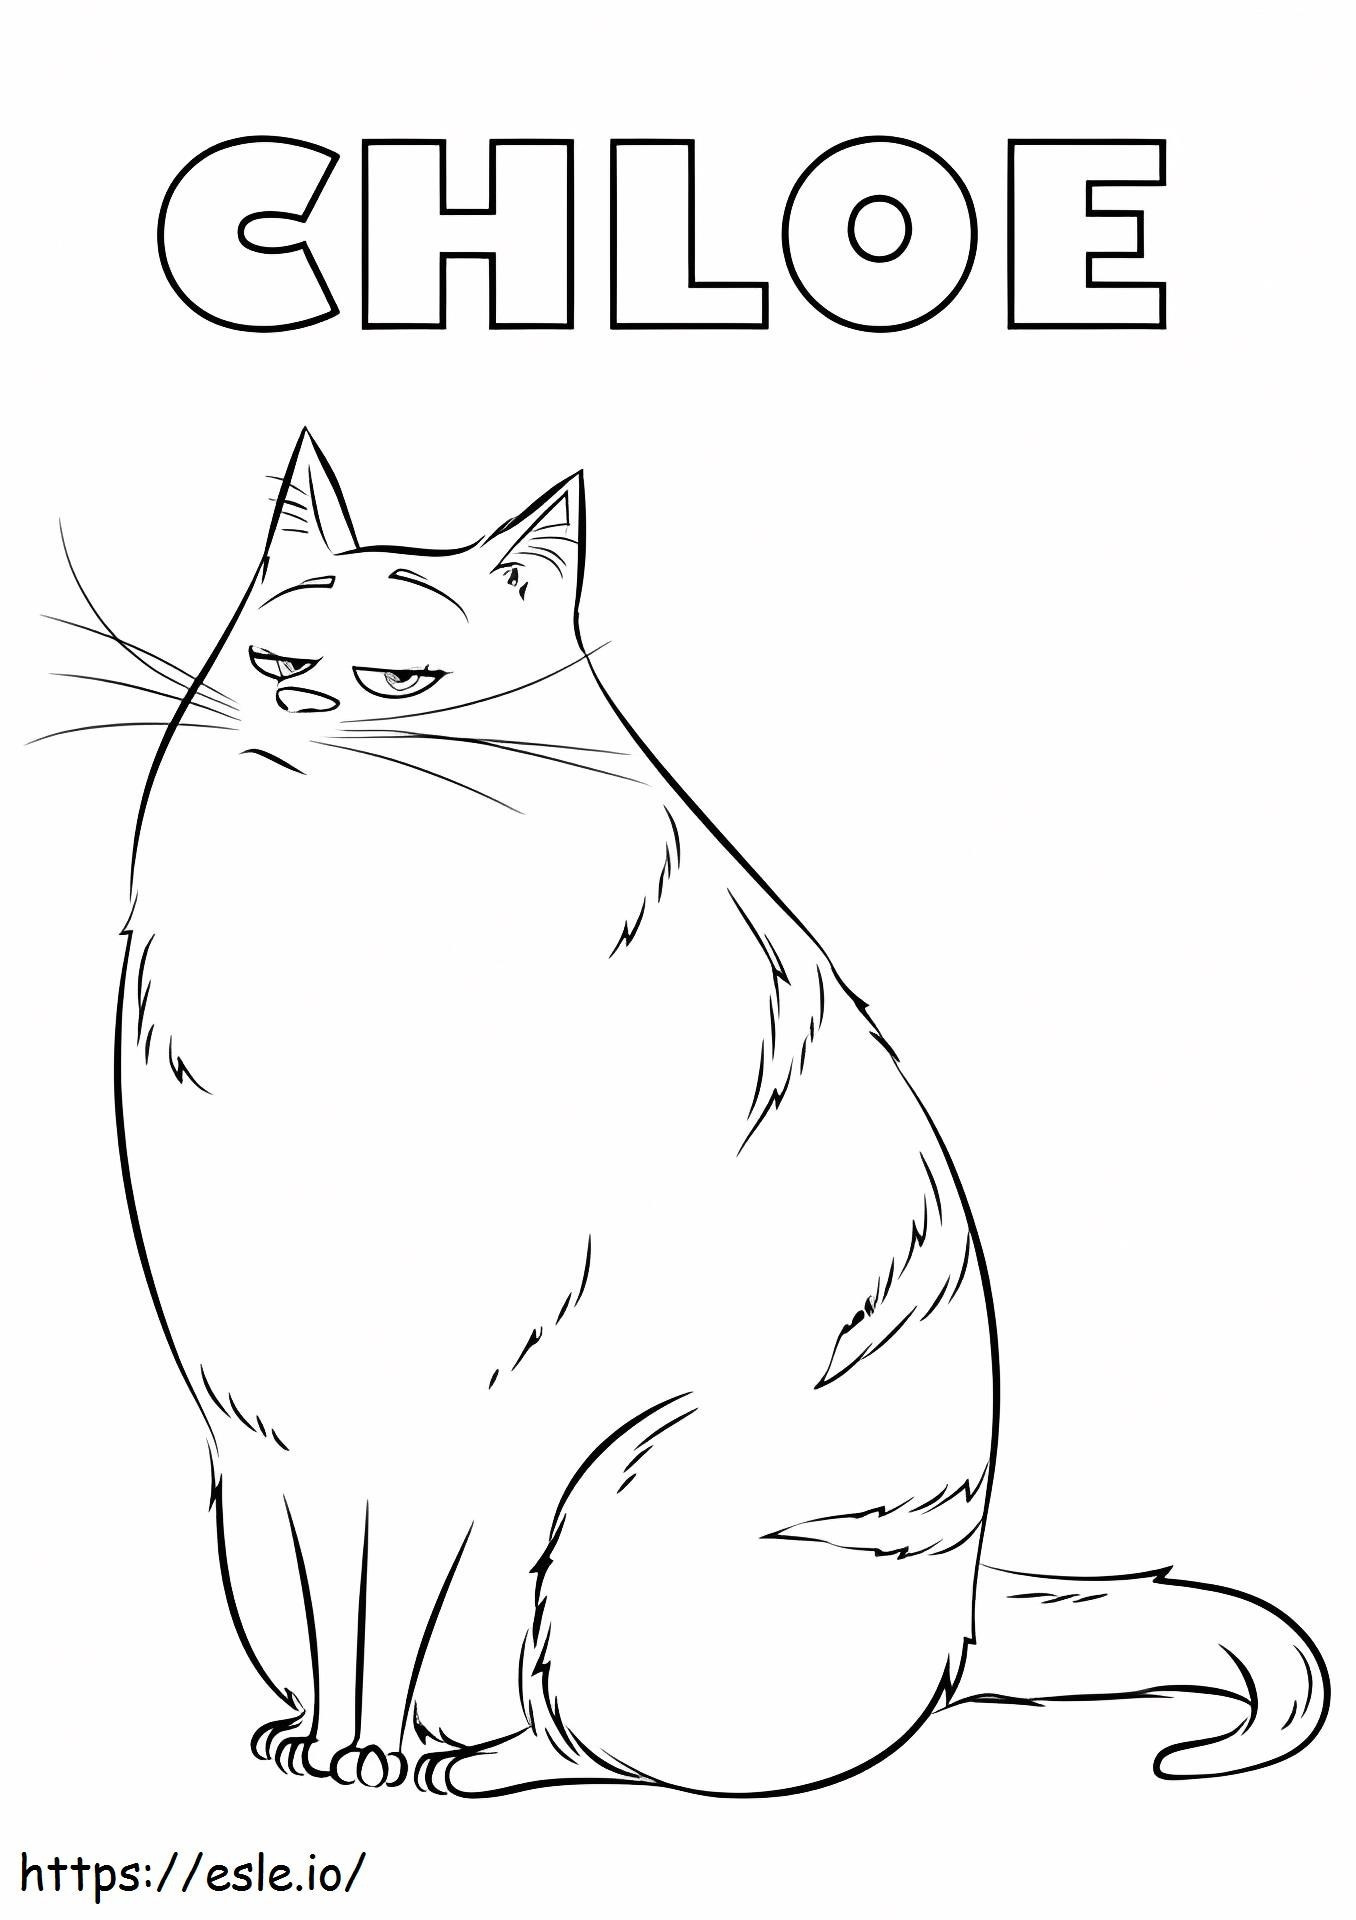 Chloe A4 coloring page